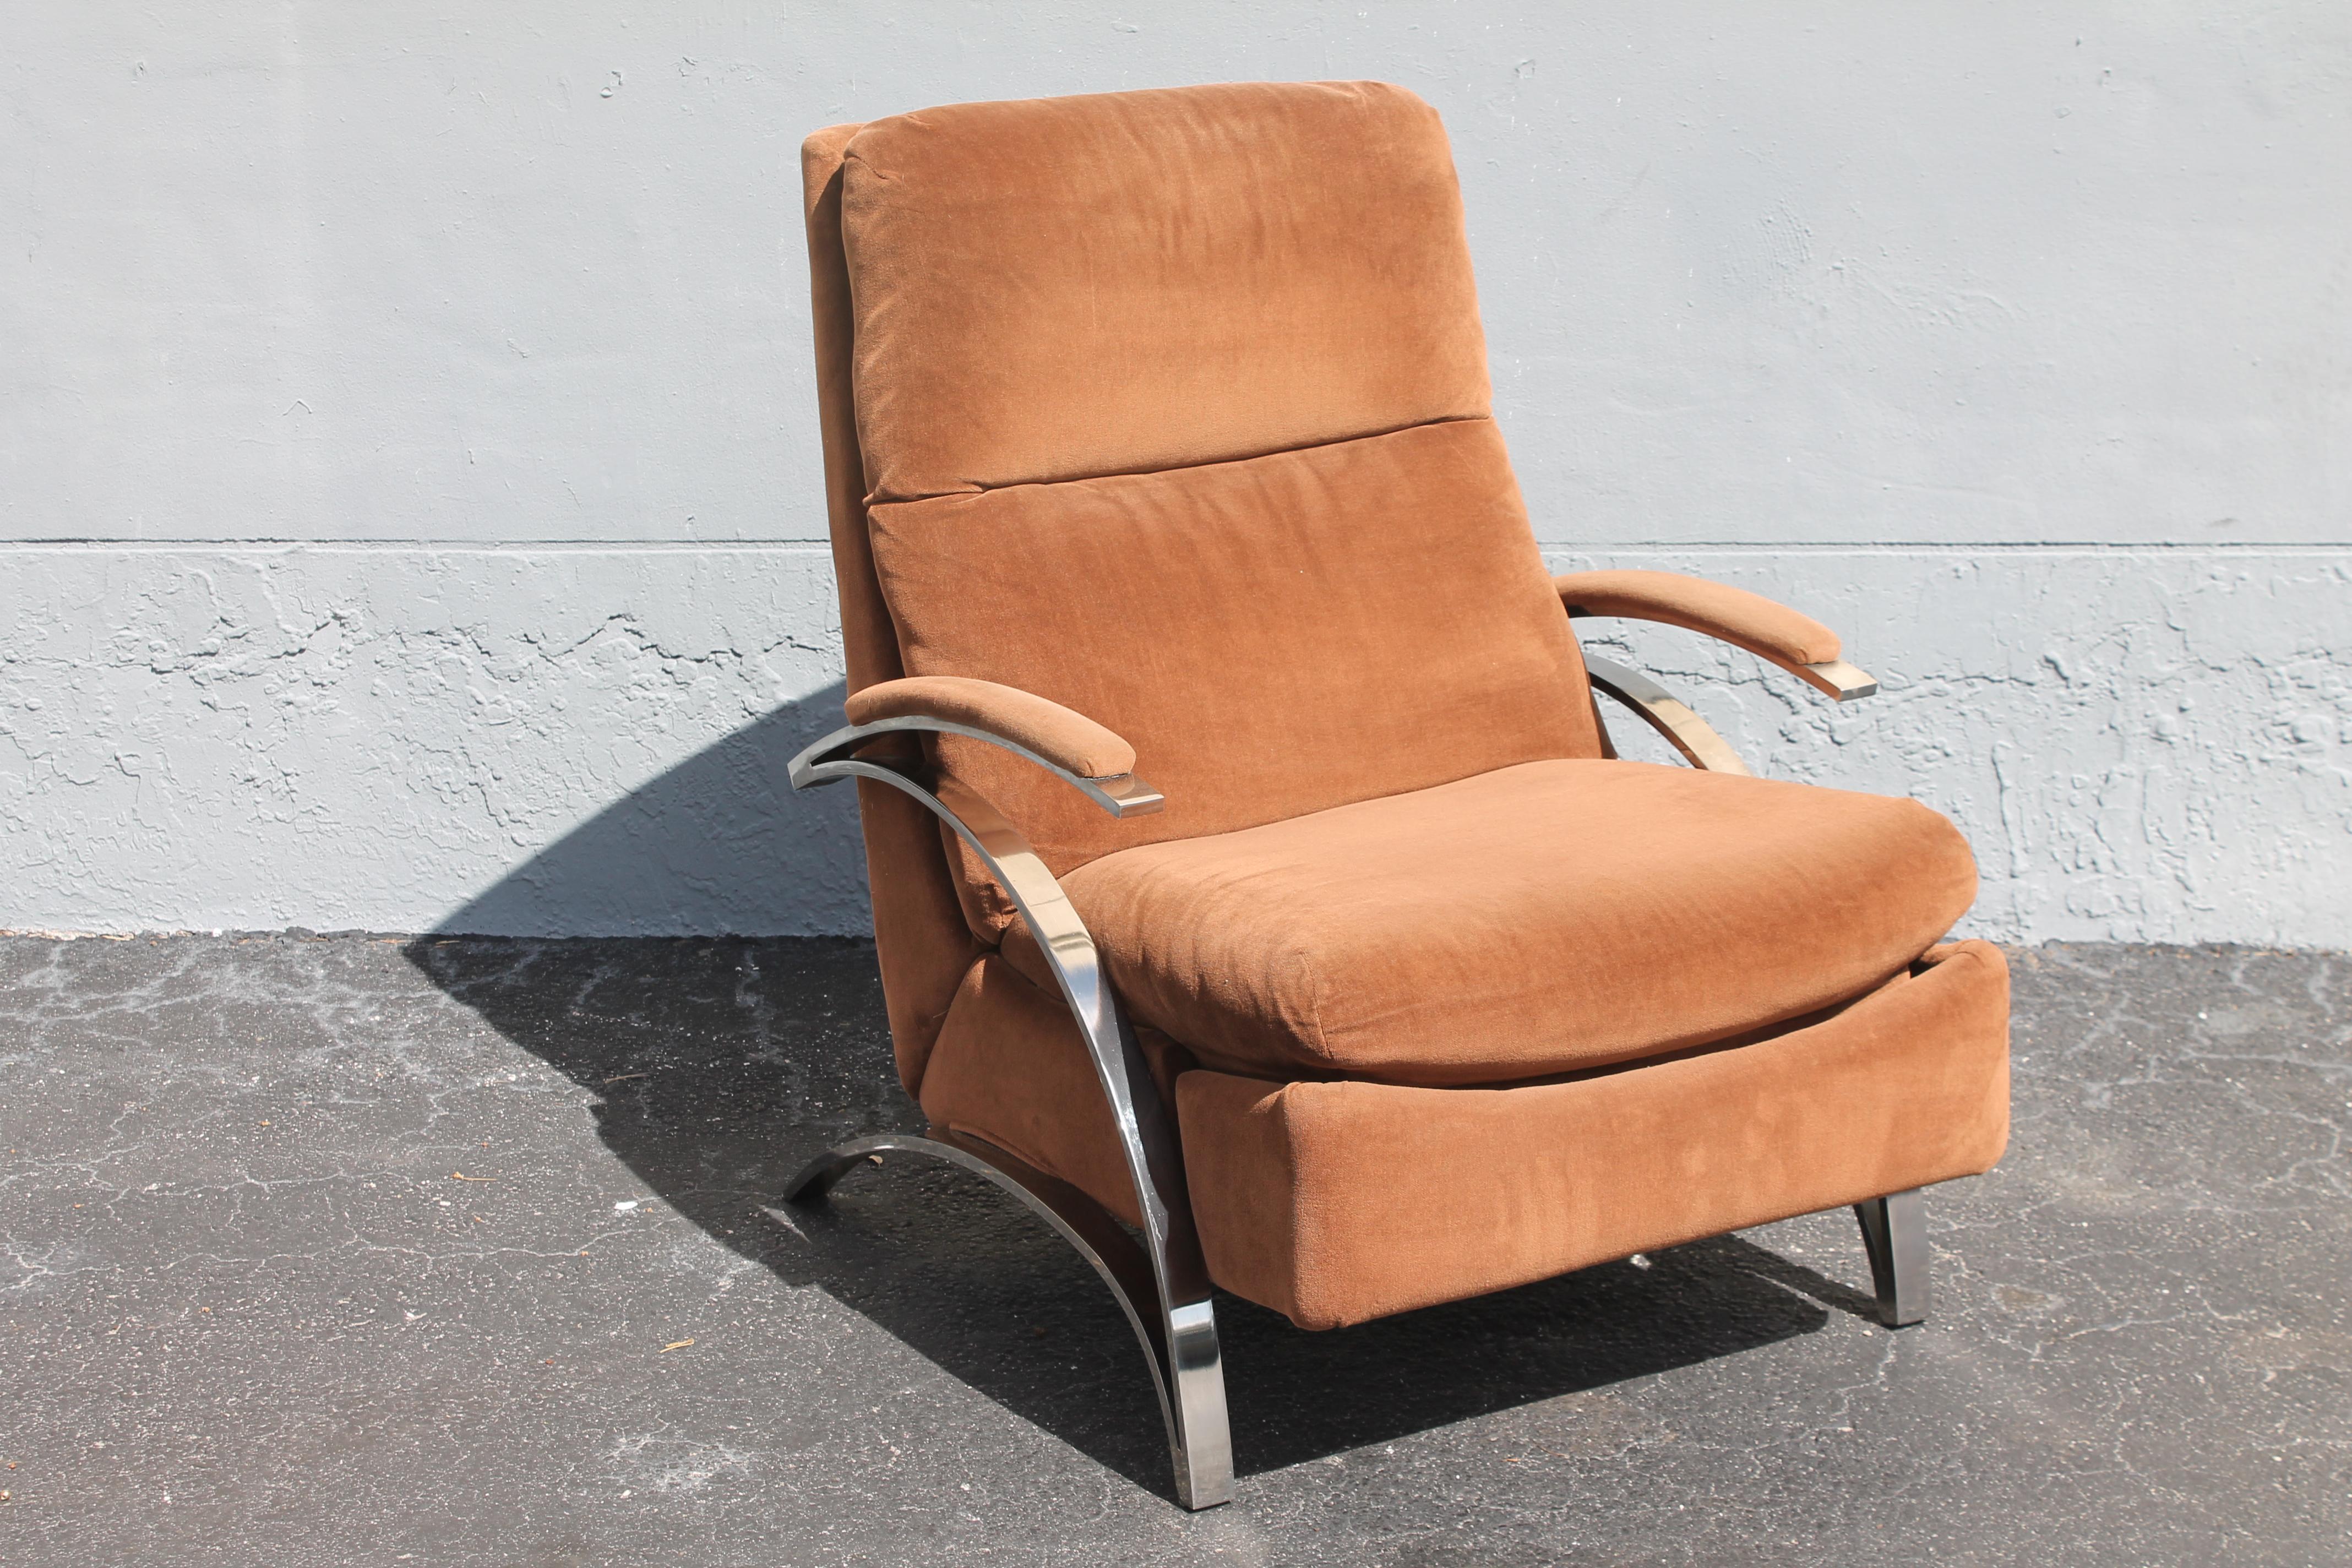 North American 1070's Vintage Plush Brown with Chrome Recliner/ Barcalounger Chair For Sale